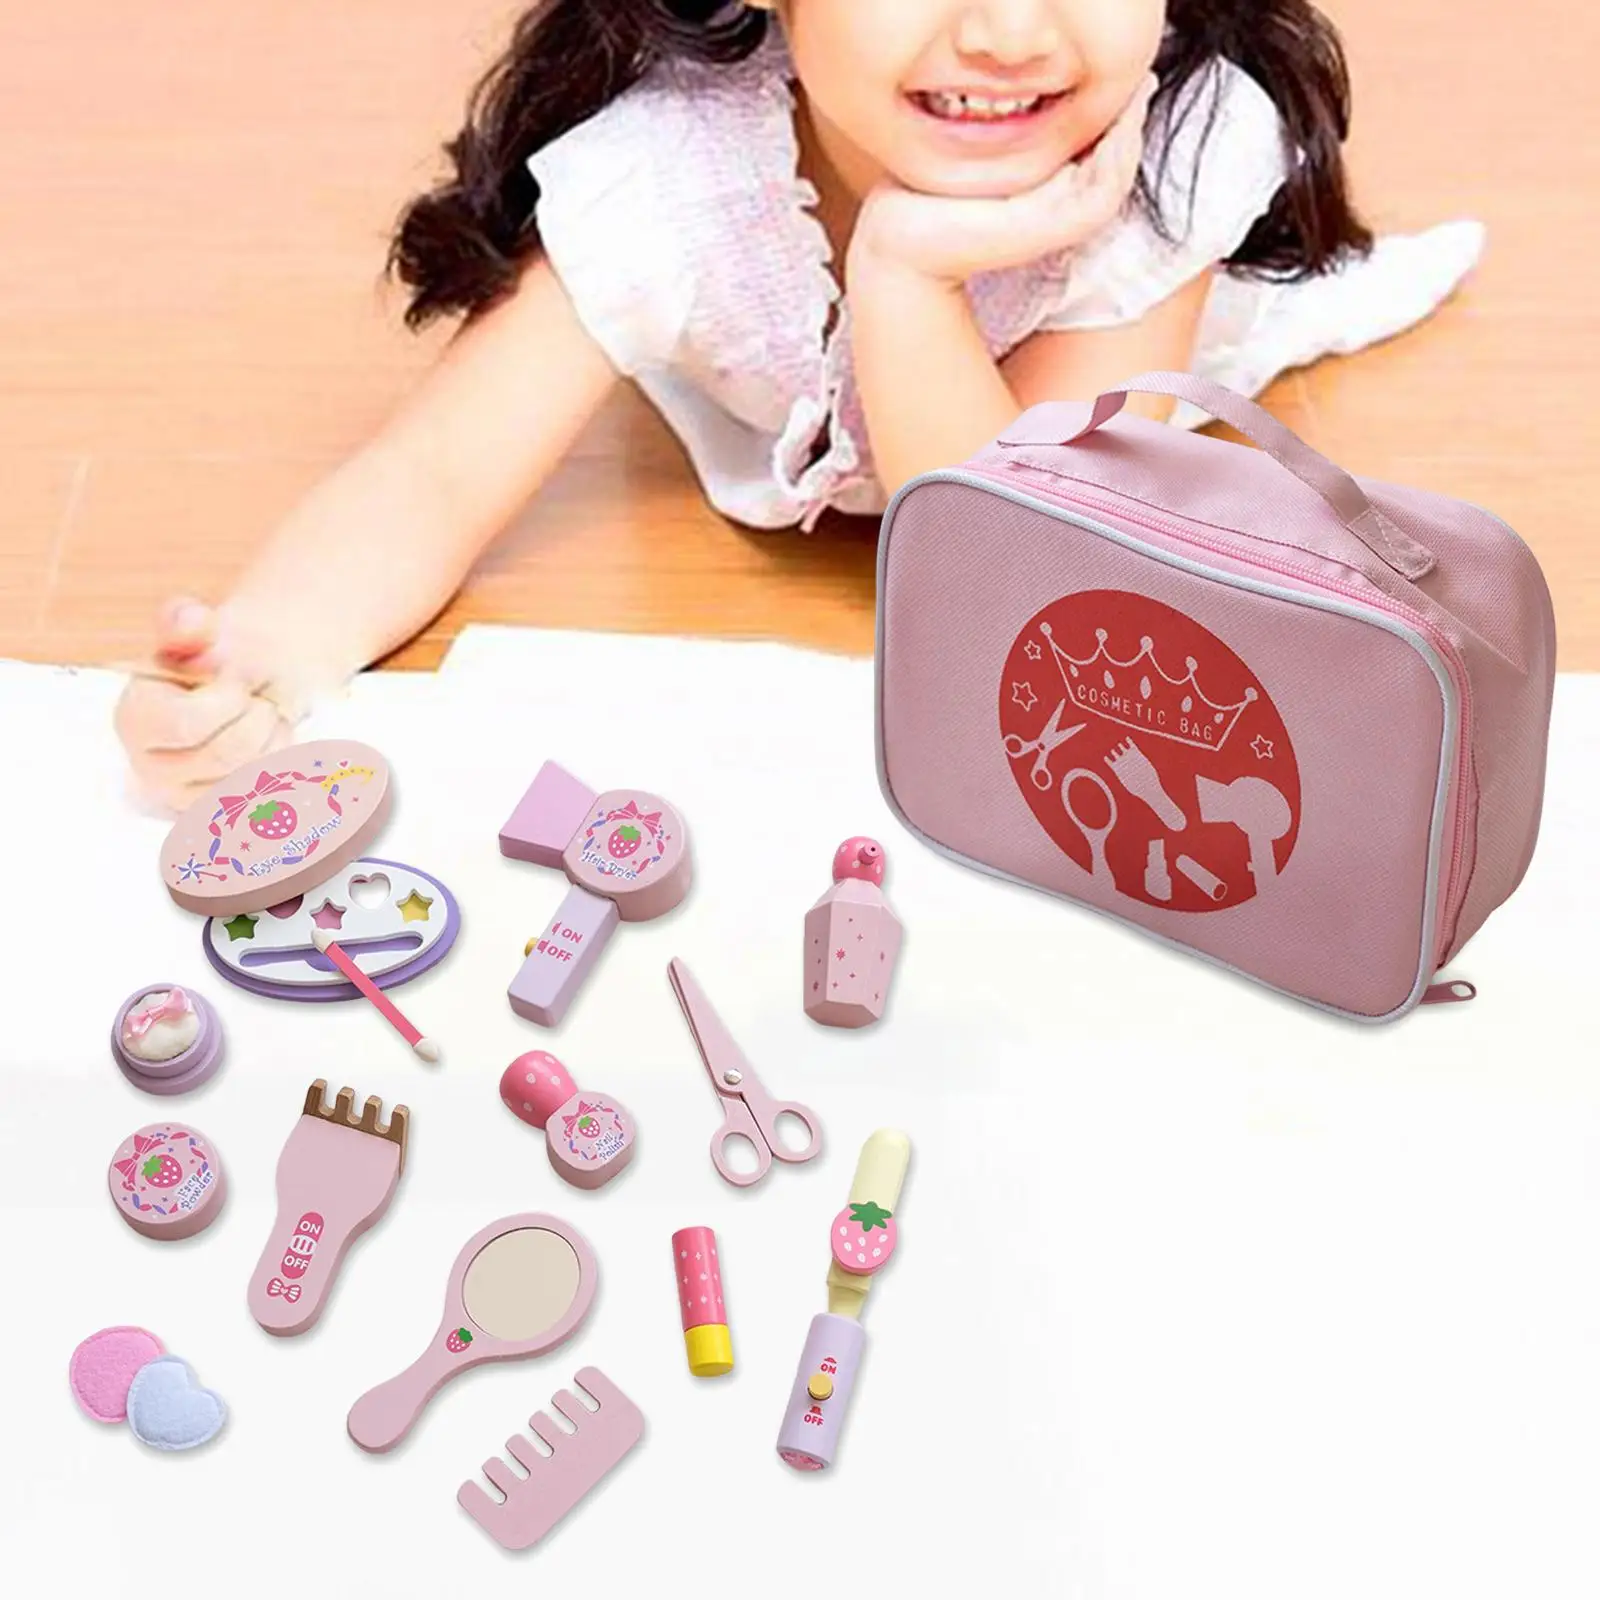 Miniature Pretend Makeup Game with Storage Bag Washable Wooden Party Favors